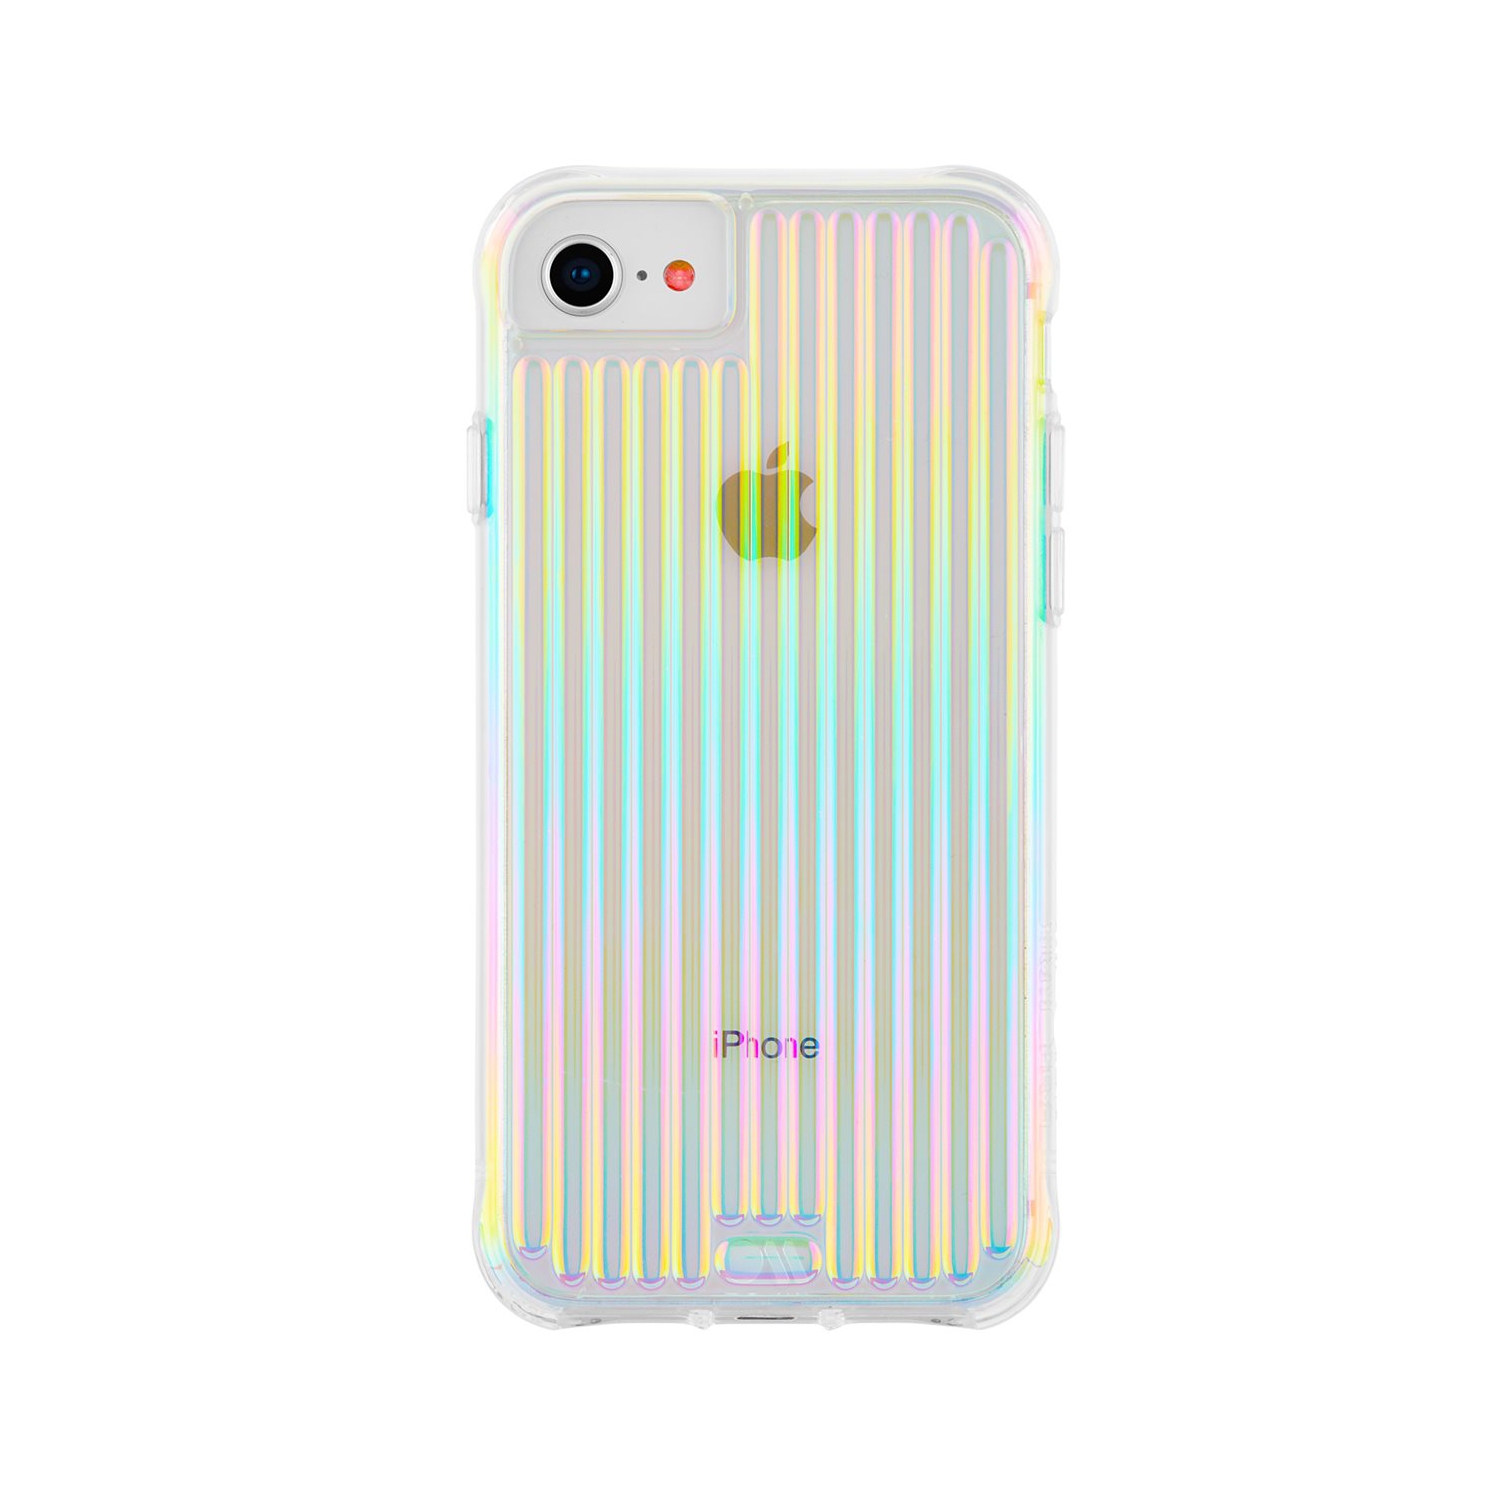 Case-Mate Tough Groove Case for iPhone SE/8/7/6/6s - Iridescent